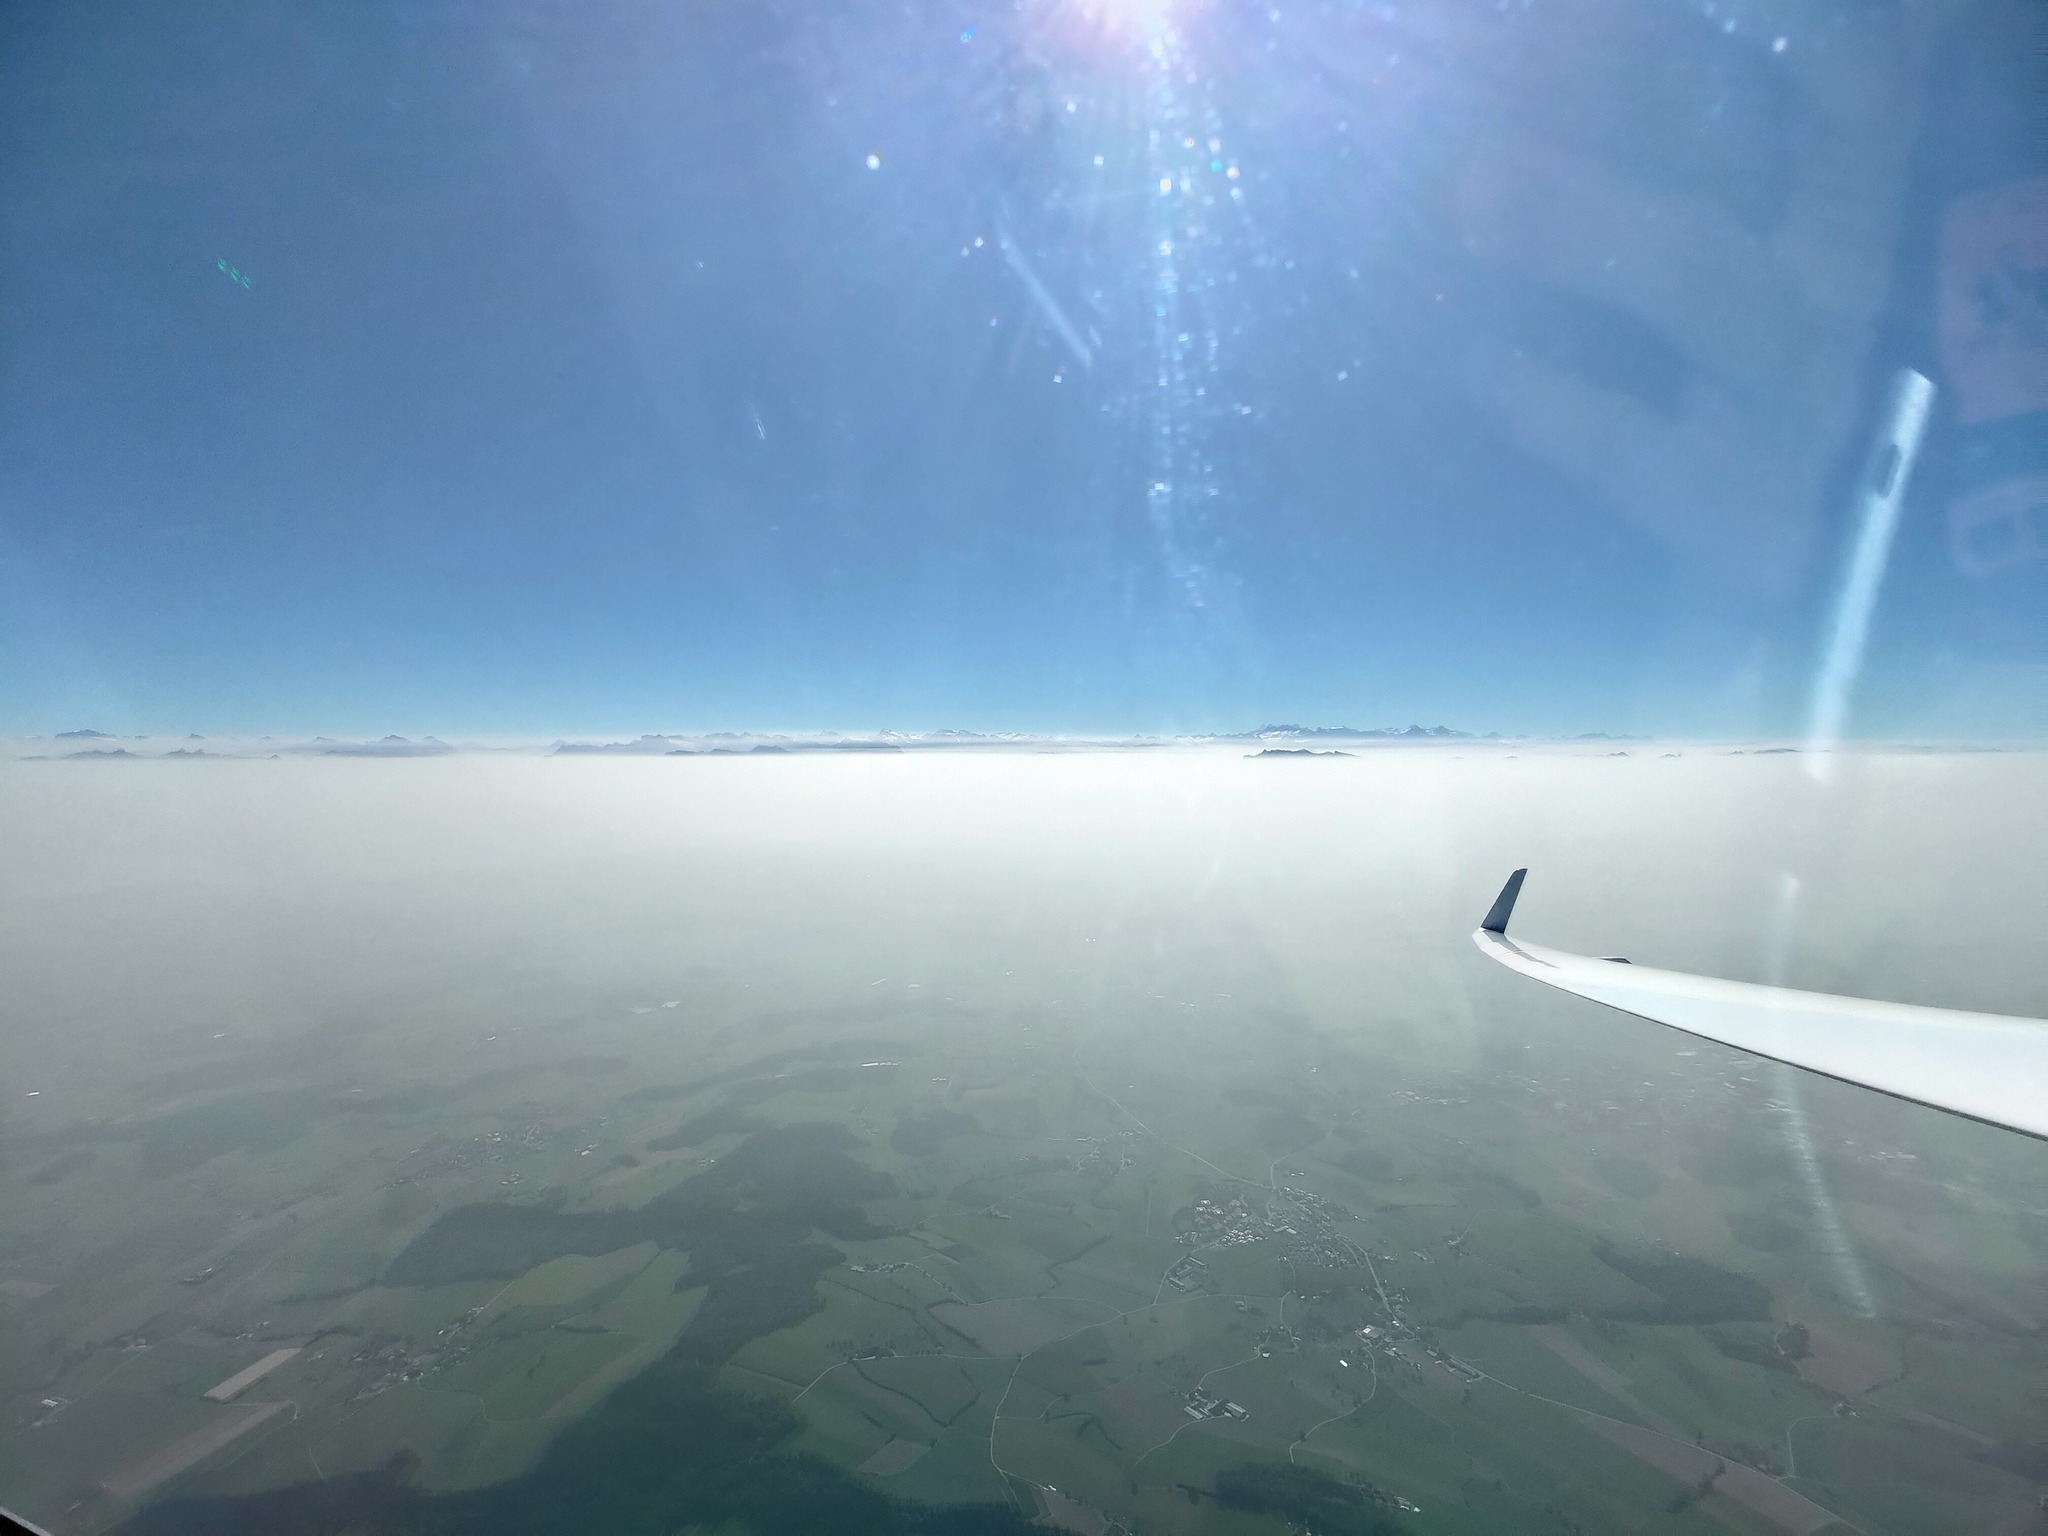 Some mountain peaks are looking out of the inversion layer #gliding #soaring #flying #segelflug #segelfliegen #volavoile #voleplaneur #glidingpictures #pilotlife #aviation #sfvs_fsvv #sgzuerich @sg_zuerich